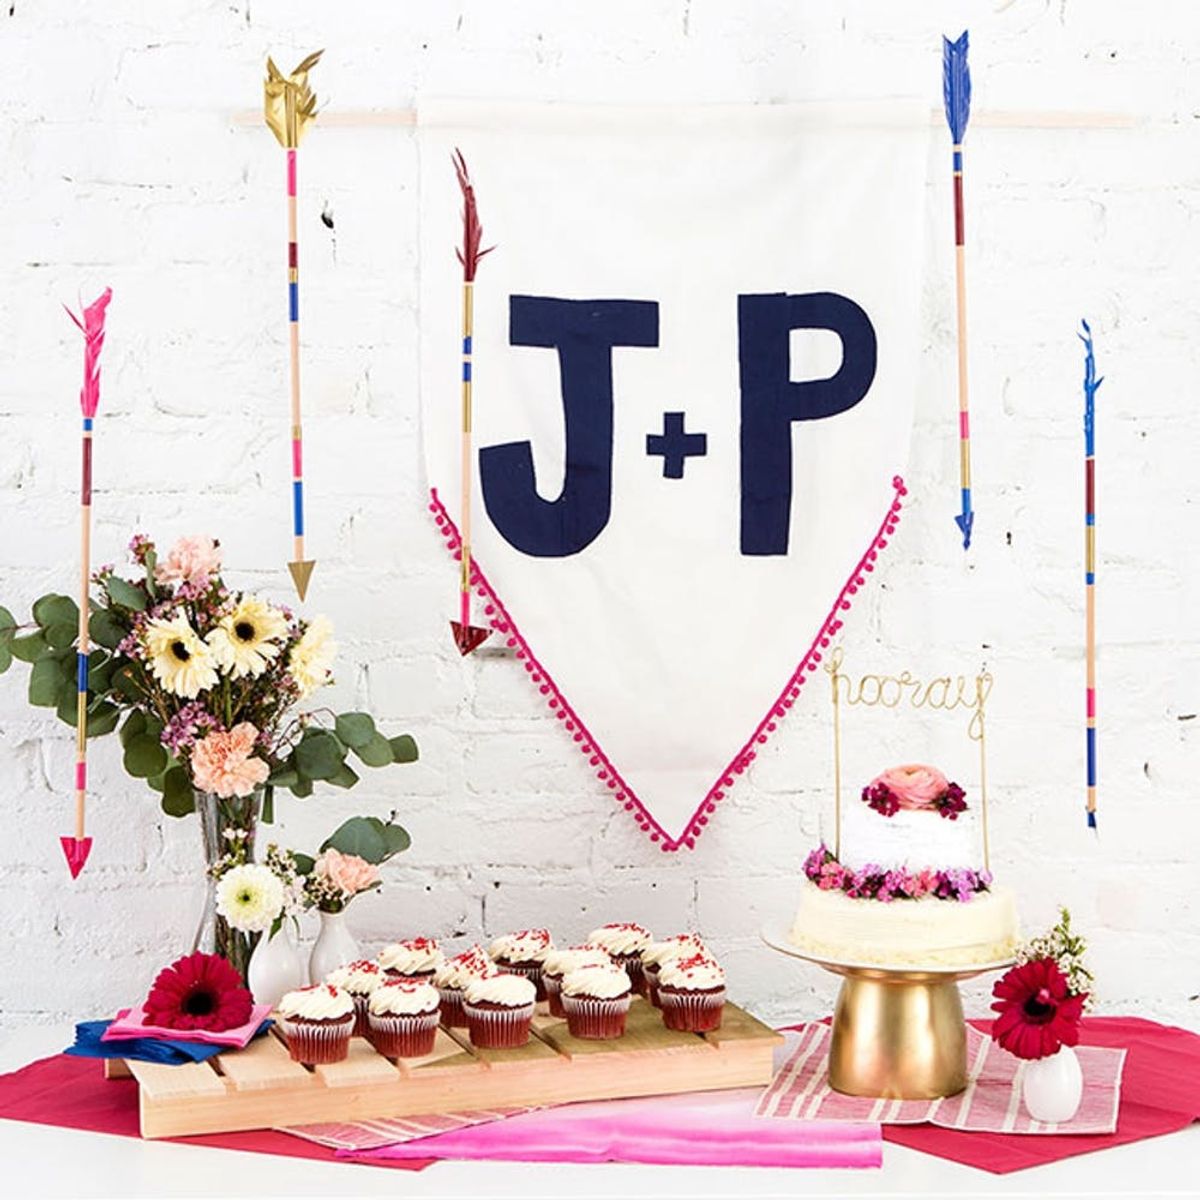 3 Ways to Decorate Your Wedding Dessert Table for Less Than $75